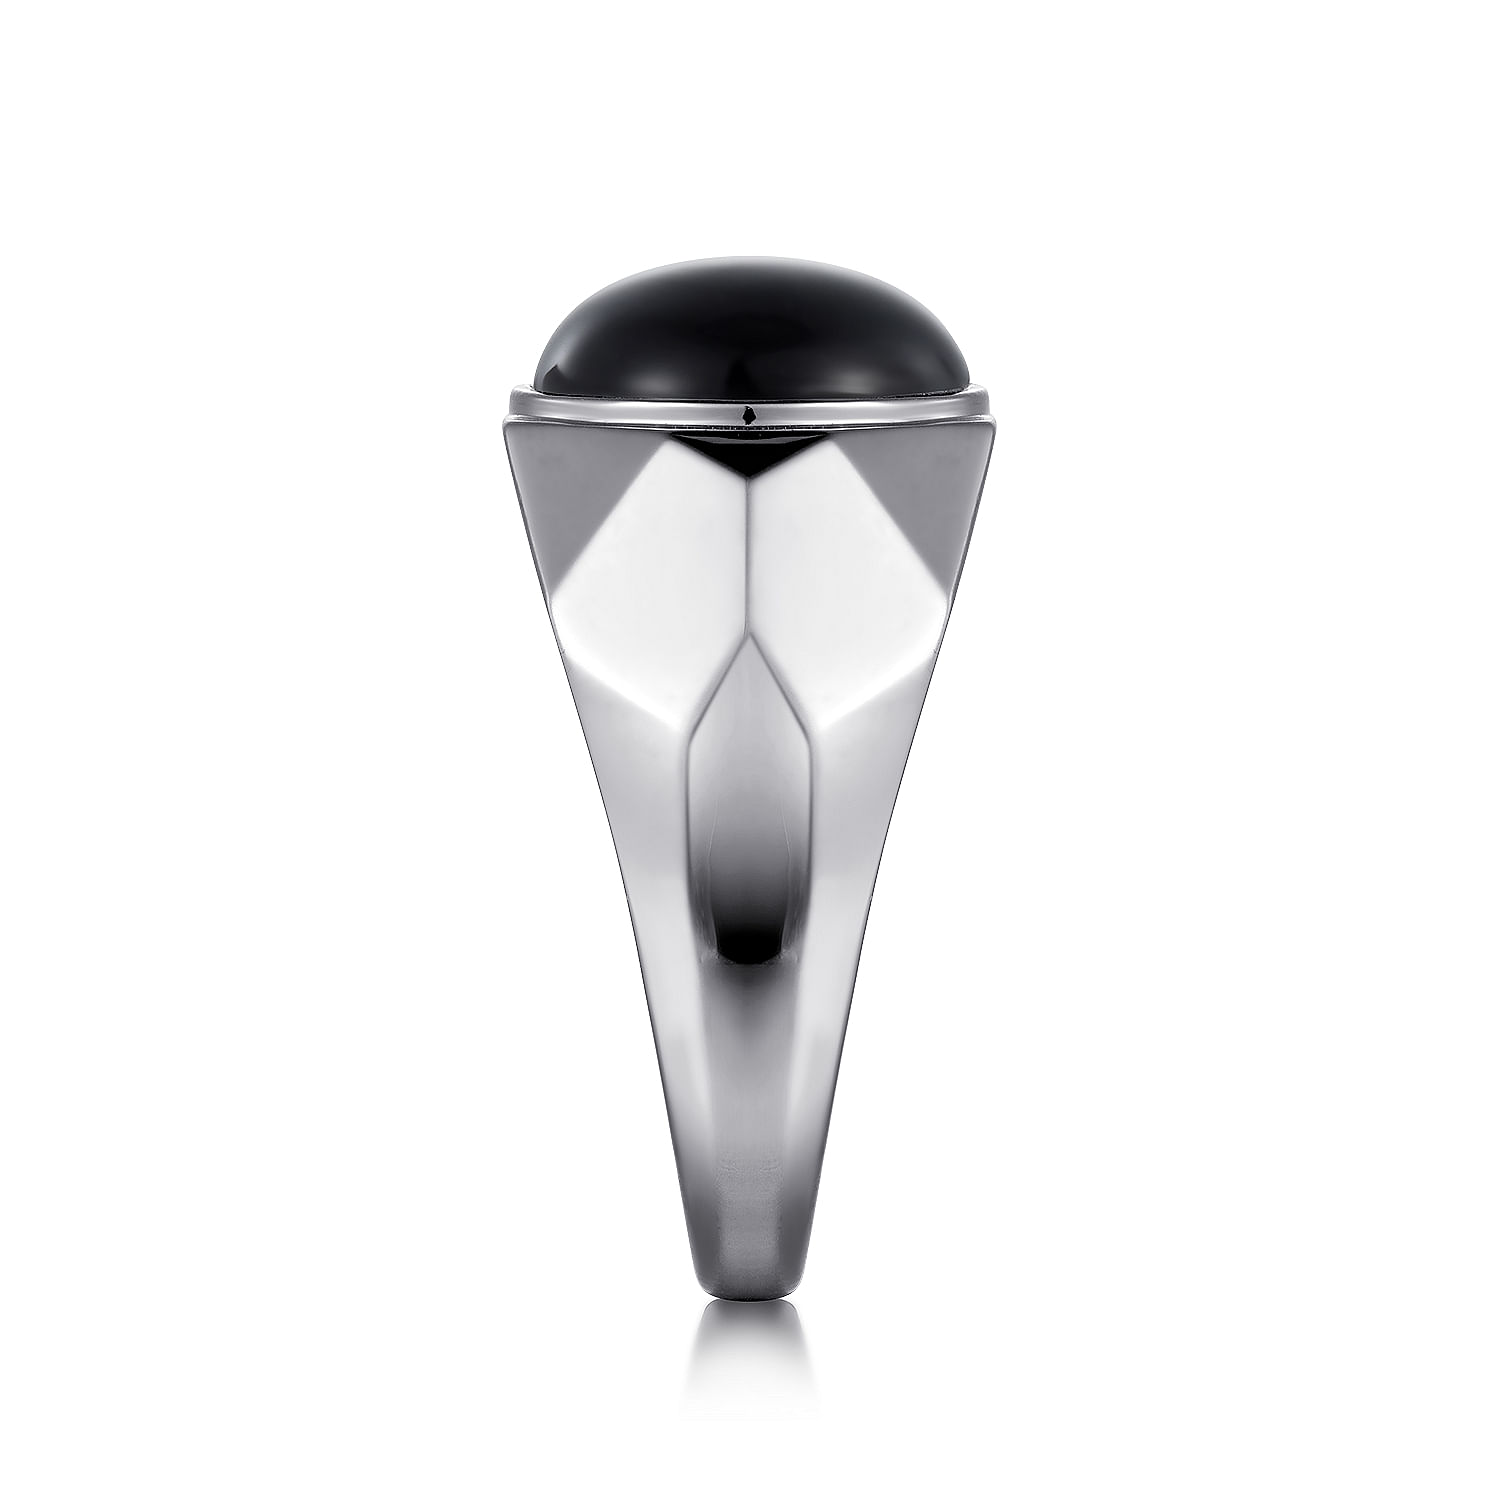 Wide 925 Sterling Silver Signet Ring with Black Onyx in High Polished Finish